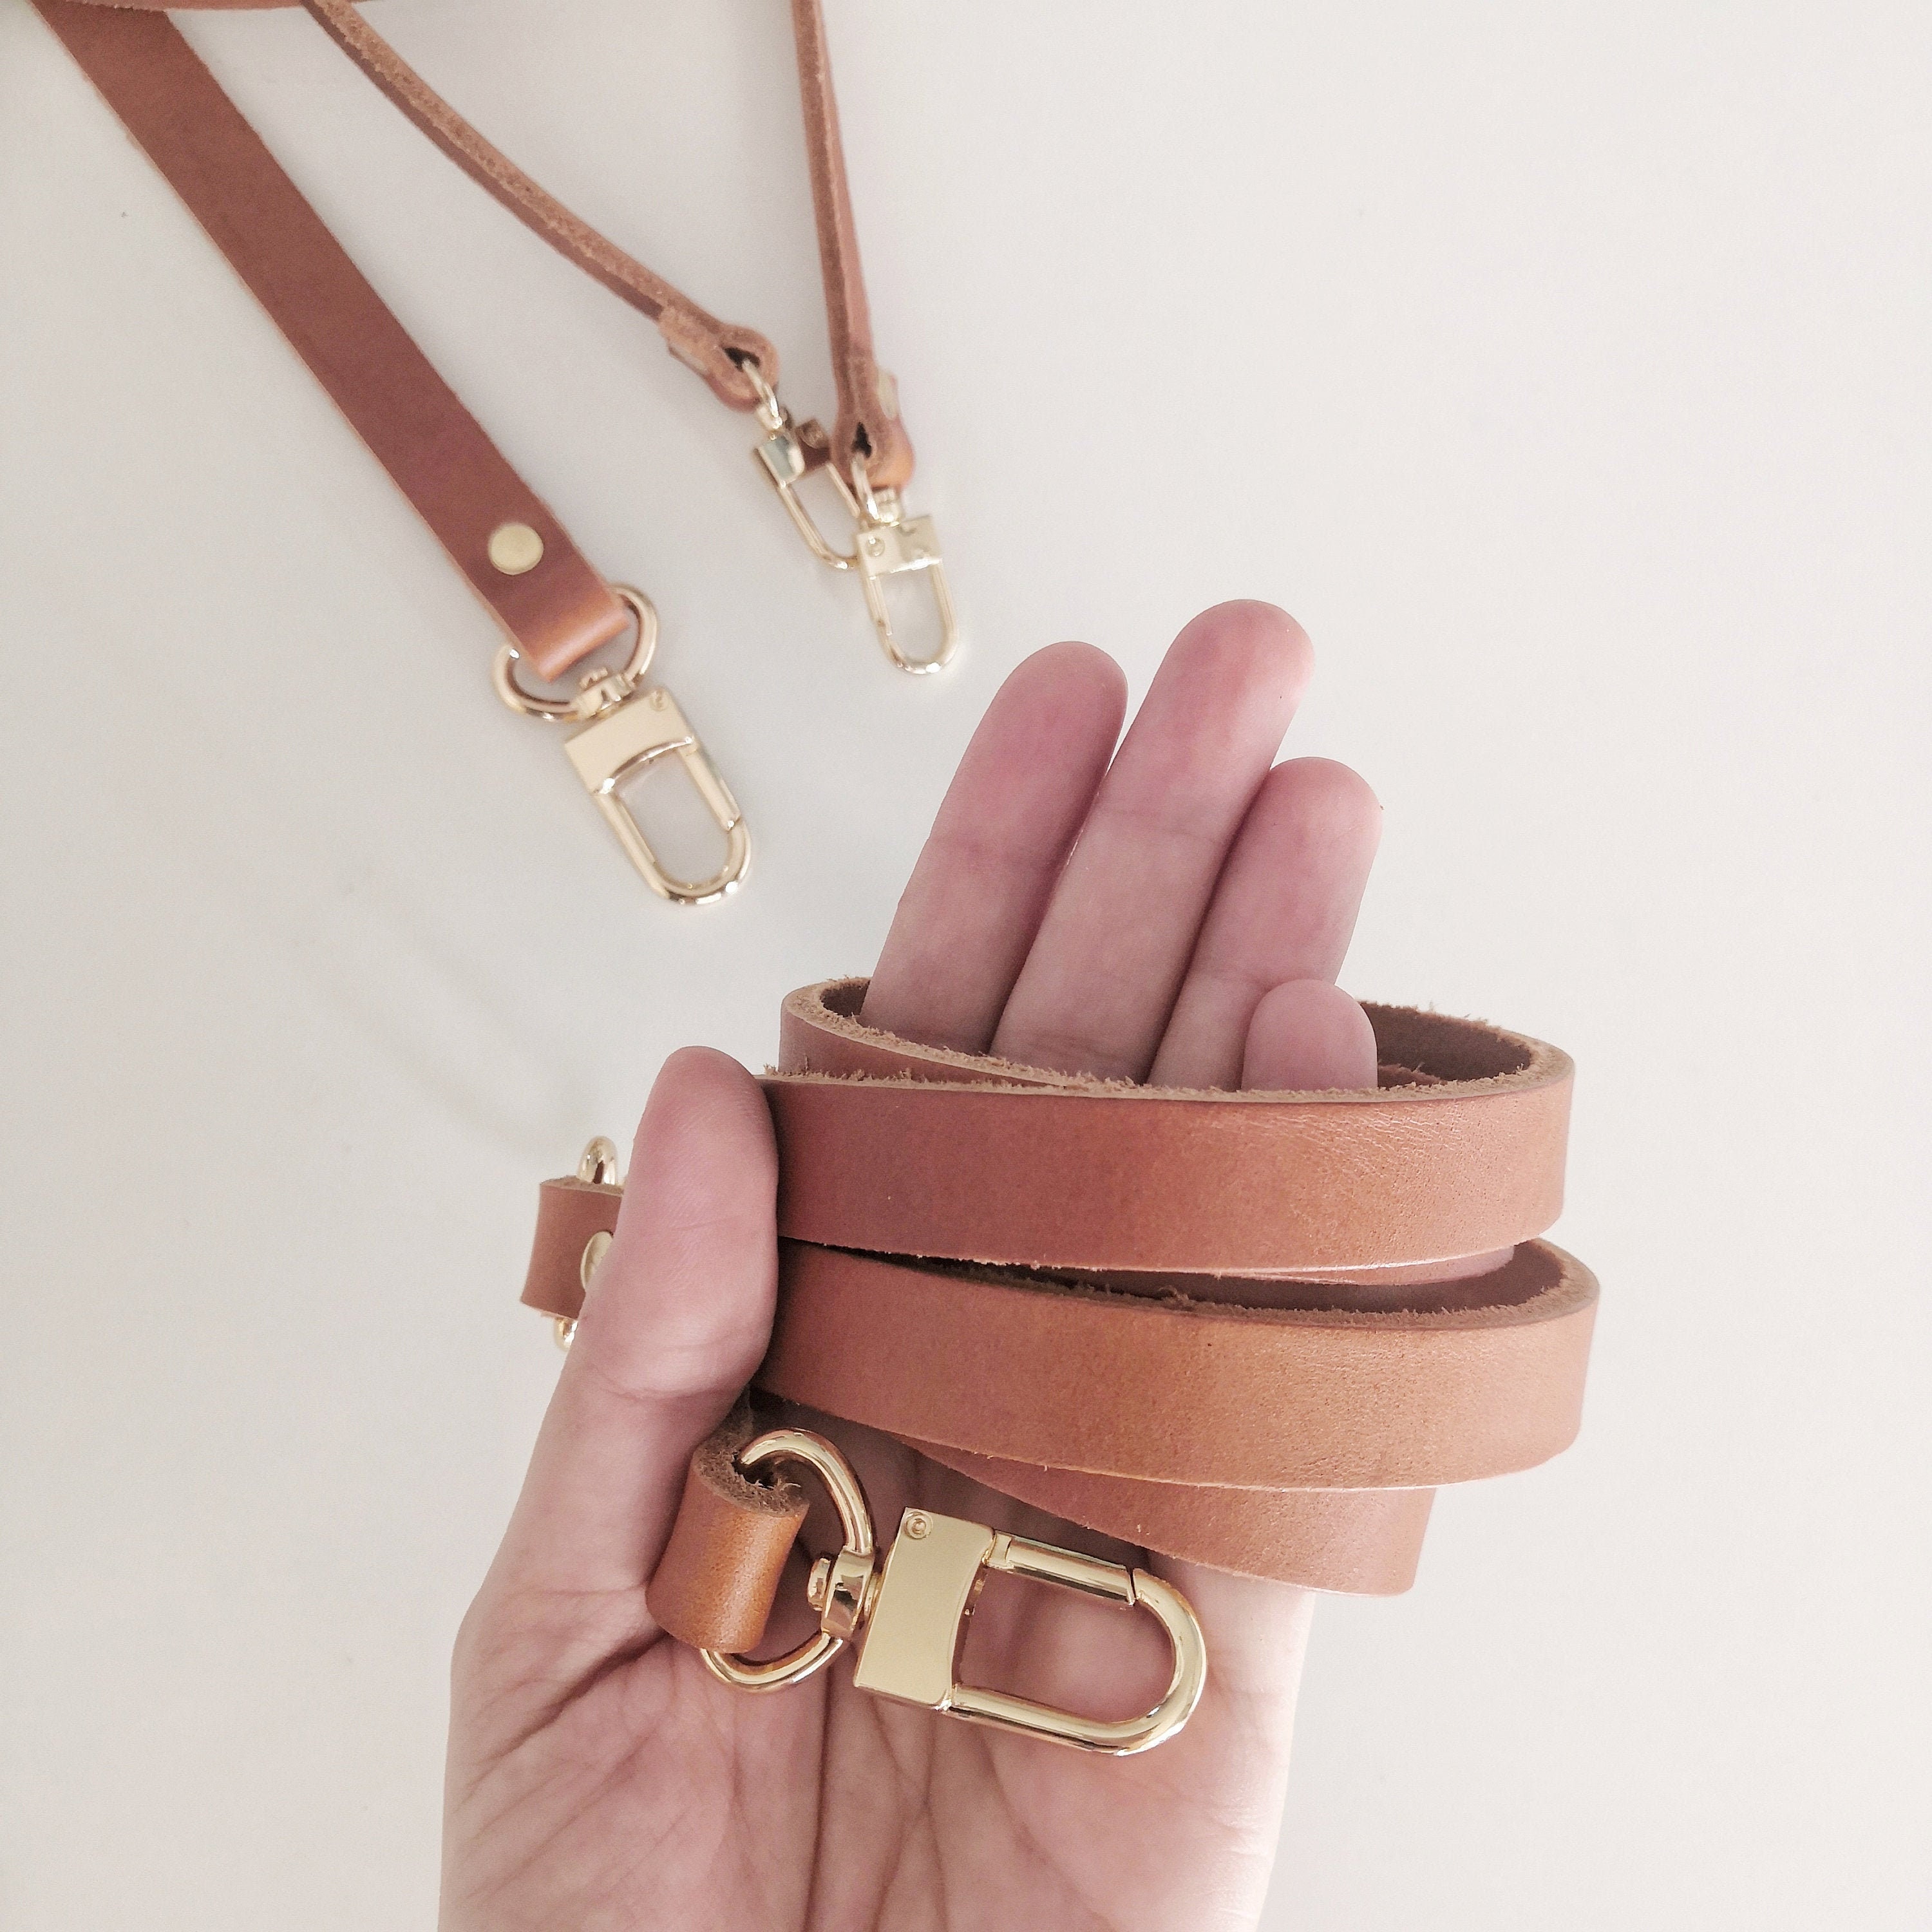 Reveal: neo noe with bandouliere strap